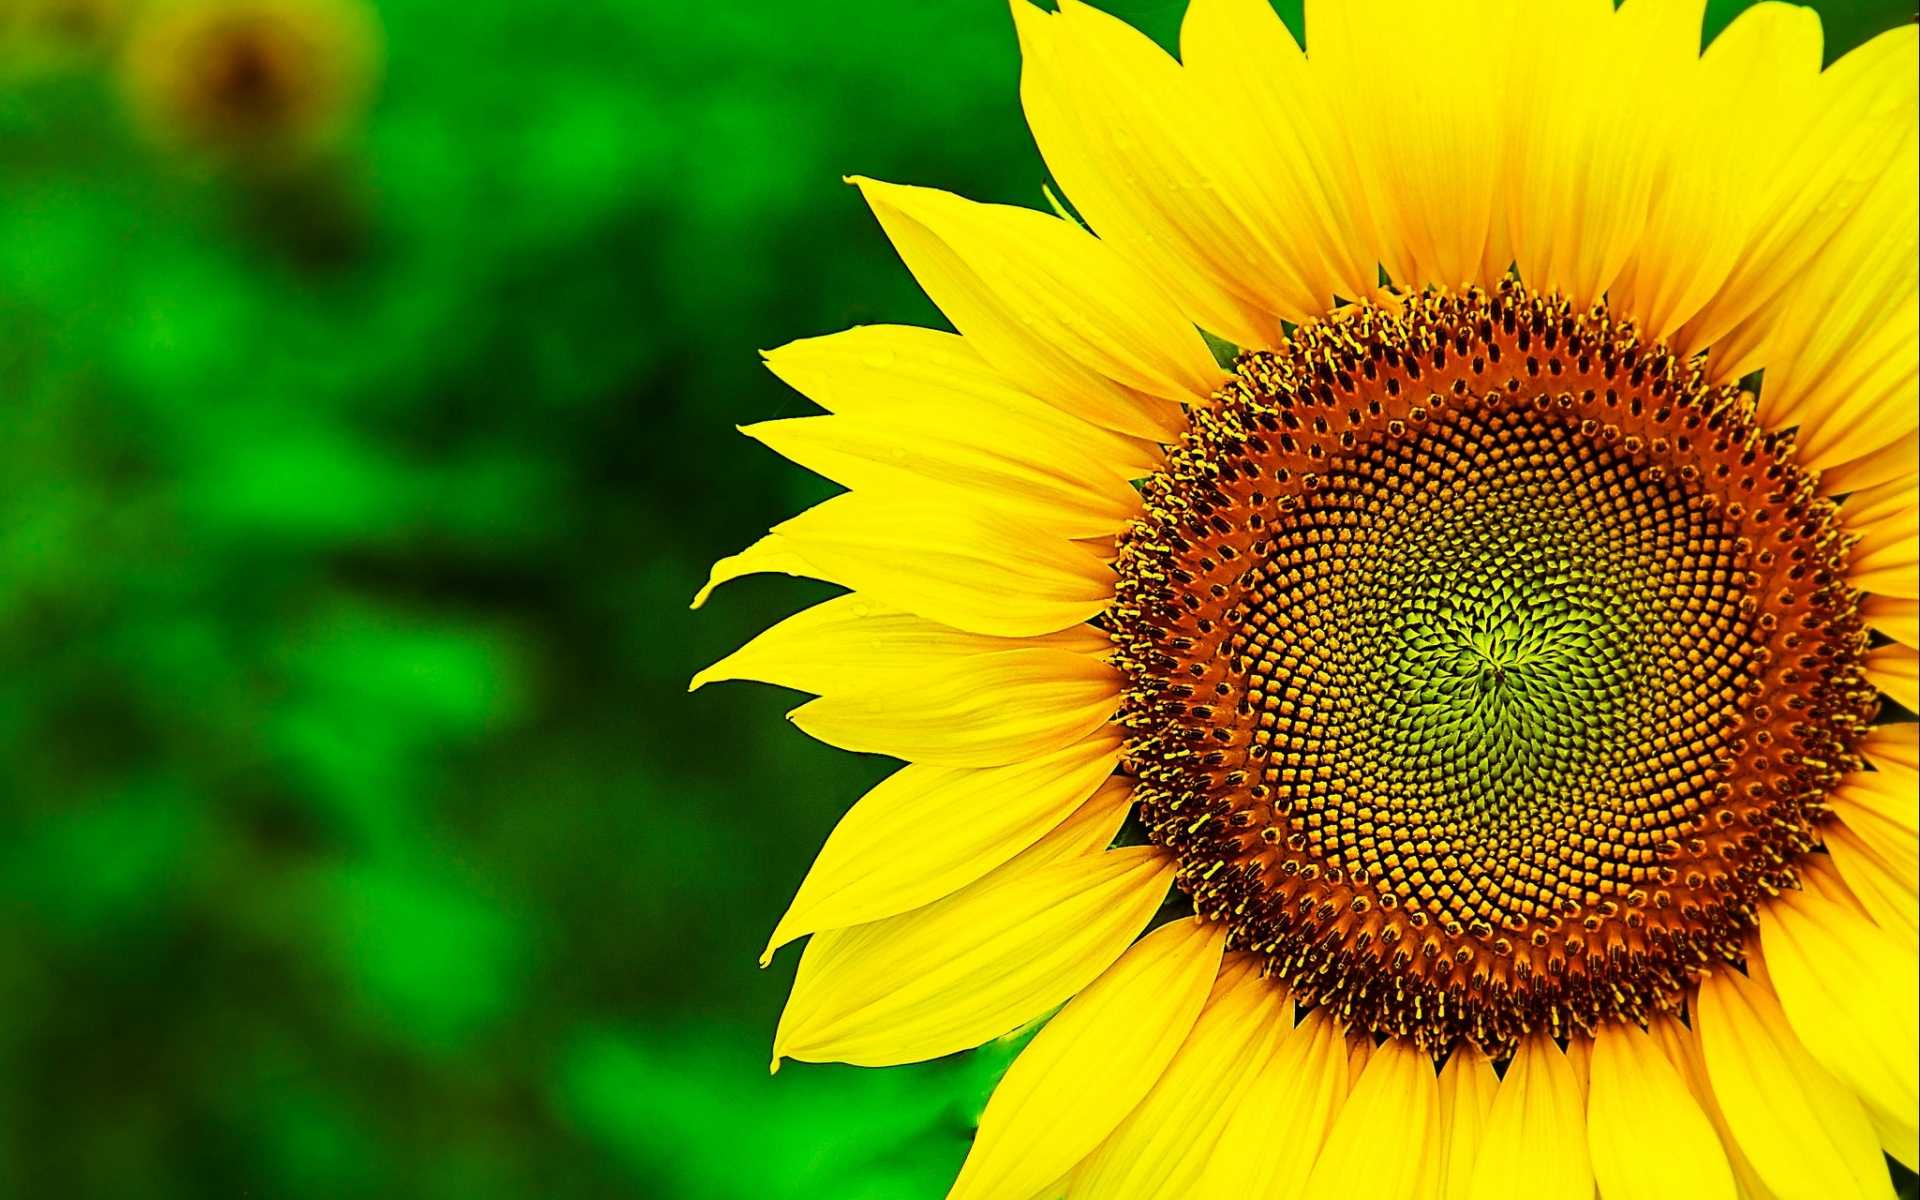 Yellow Sunflower Wallpapers Group 79